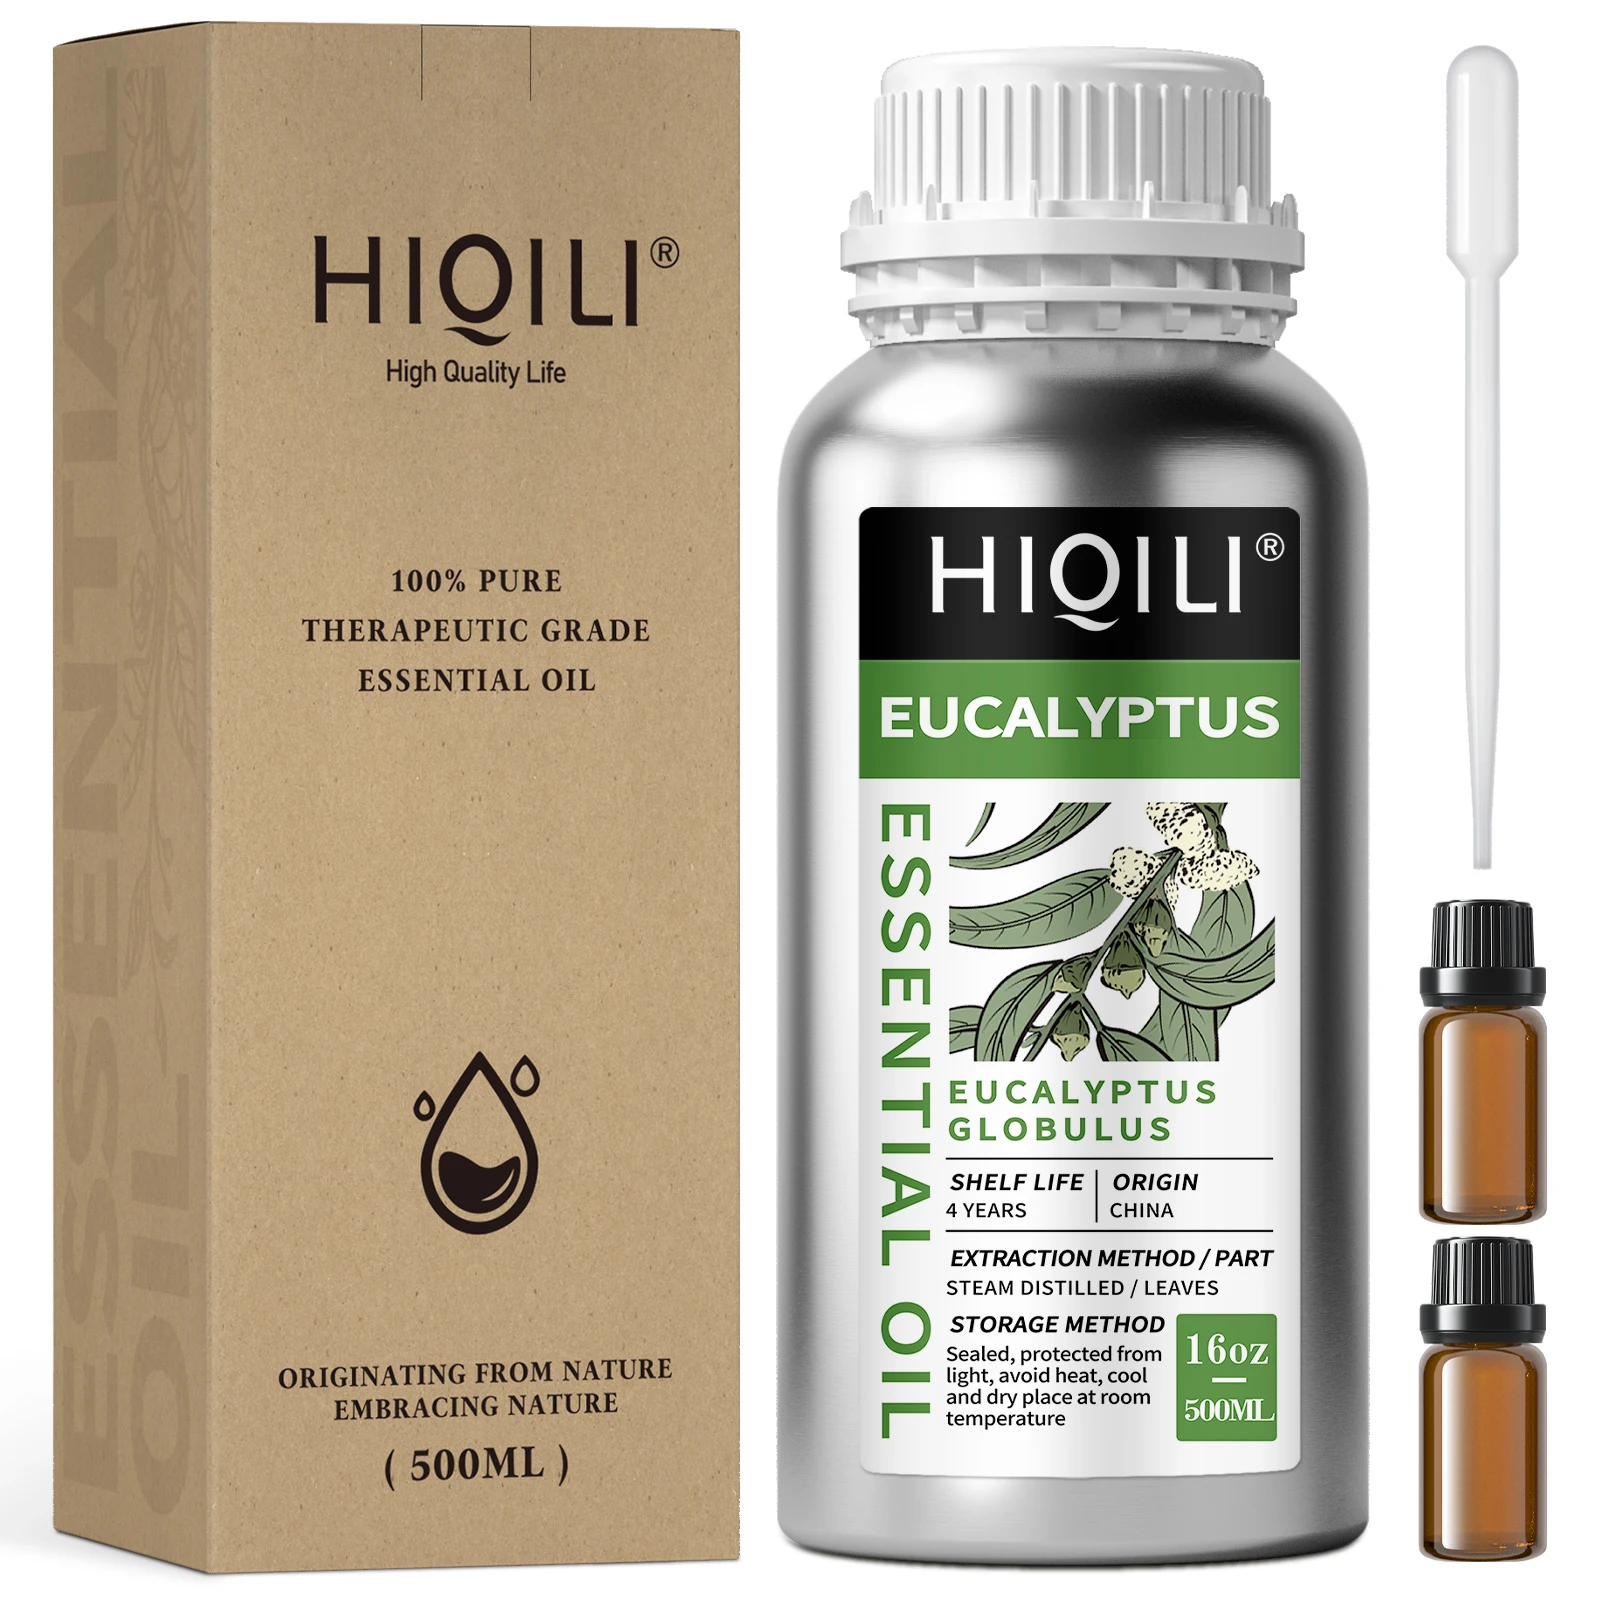 HIQILI 500ML Eucalyptus Essential Oils, 100% Pure Nature for Aromatherapy Used for Diffuser, Humidifier, Massage | Prevent Colds 500ml essential oil diffuser mist humidifier diffuser